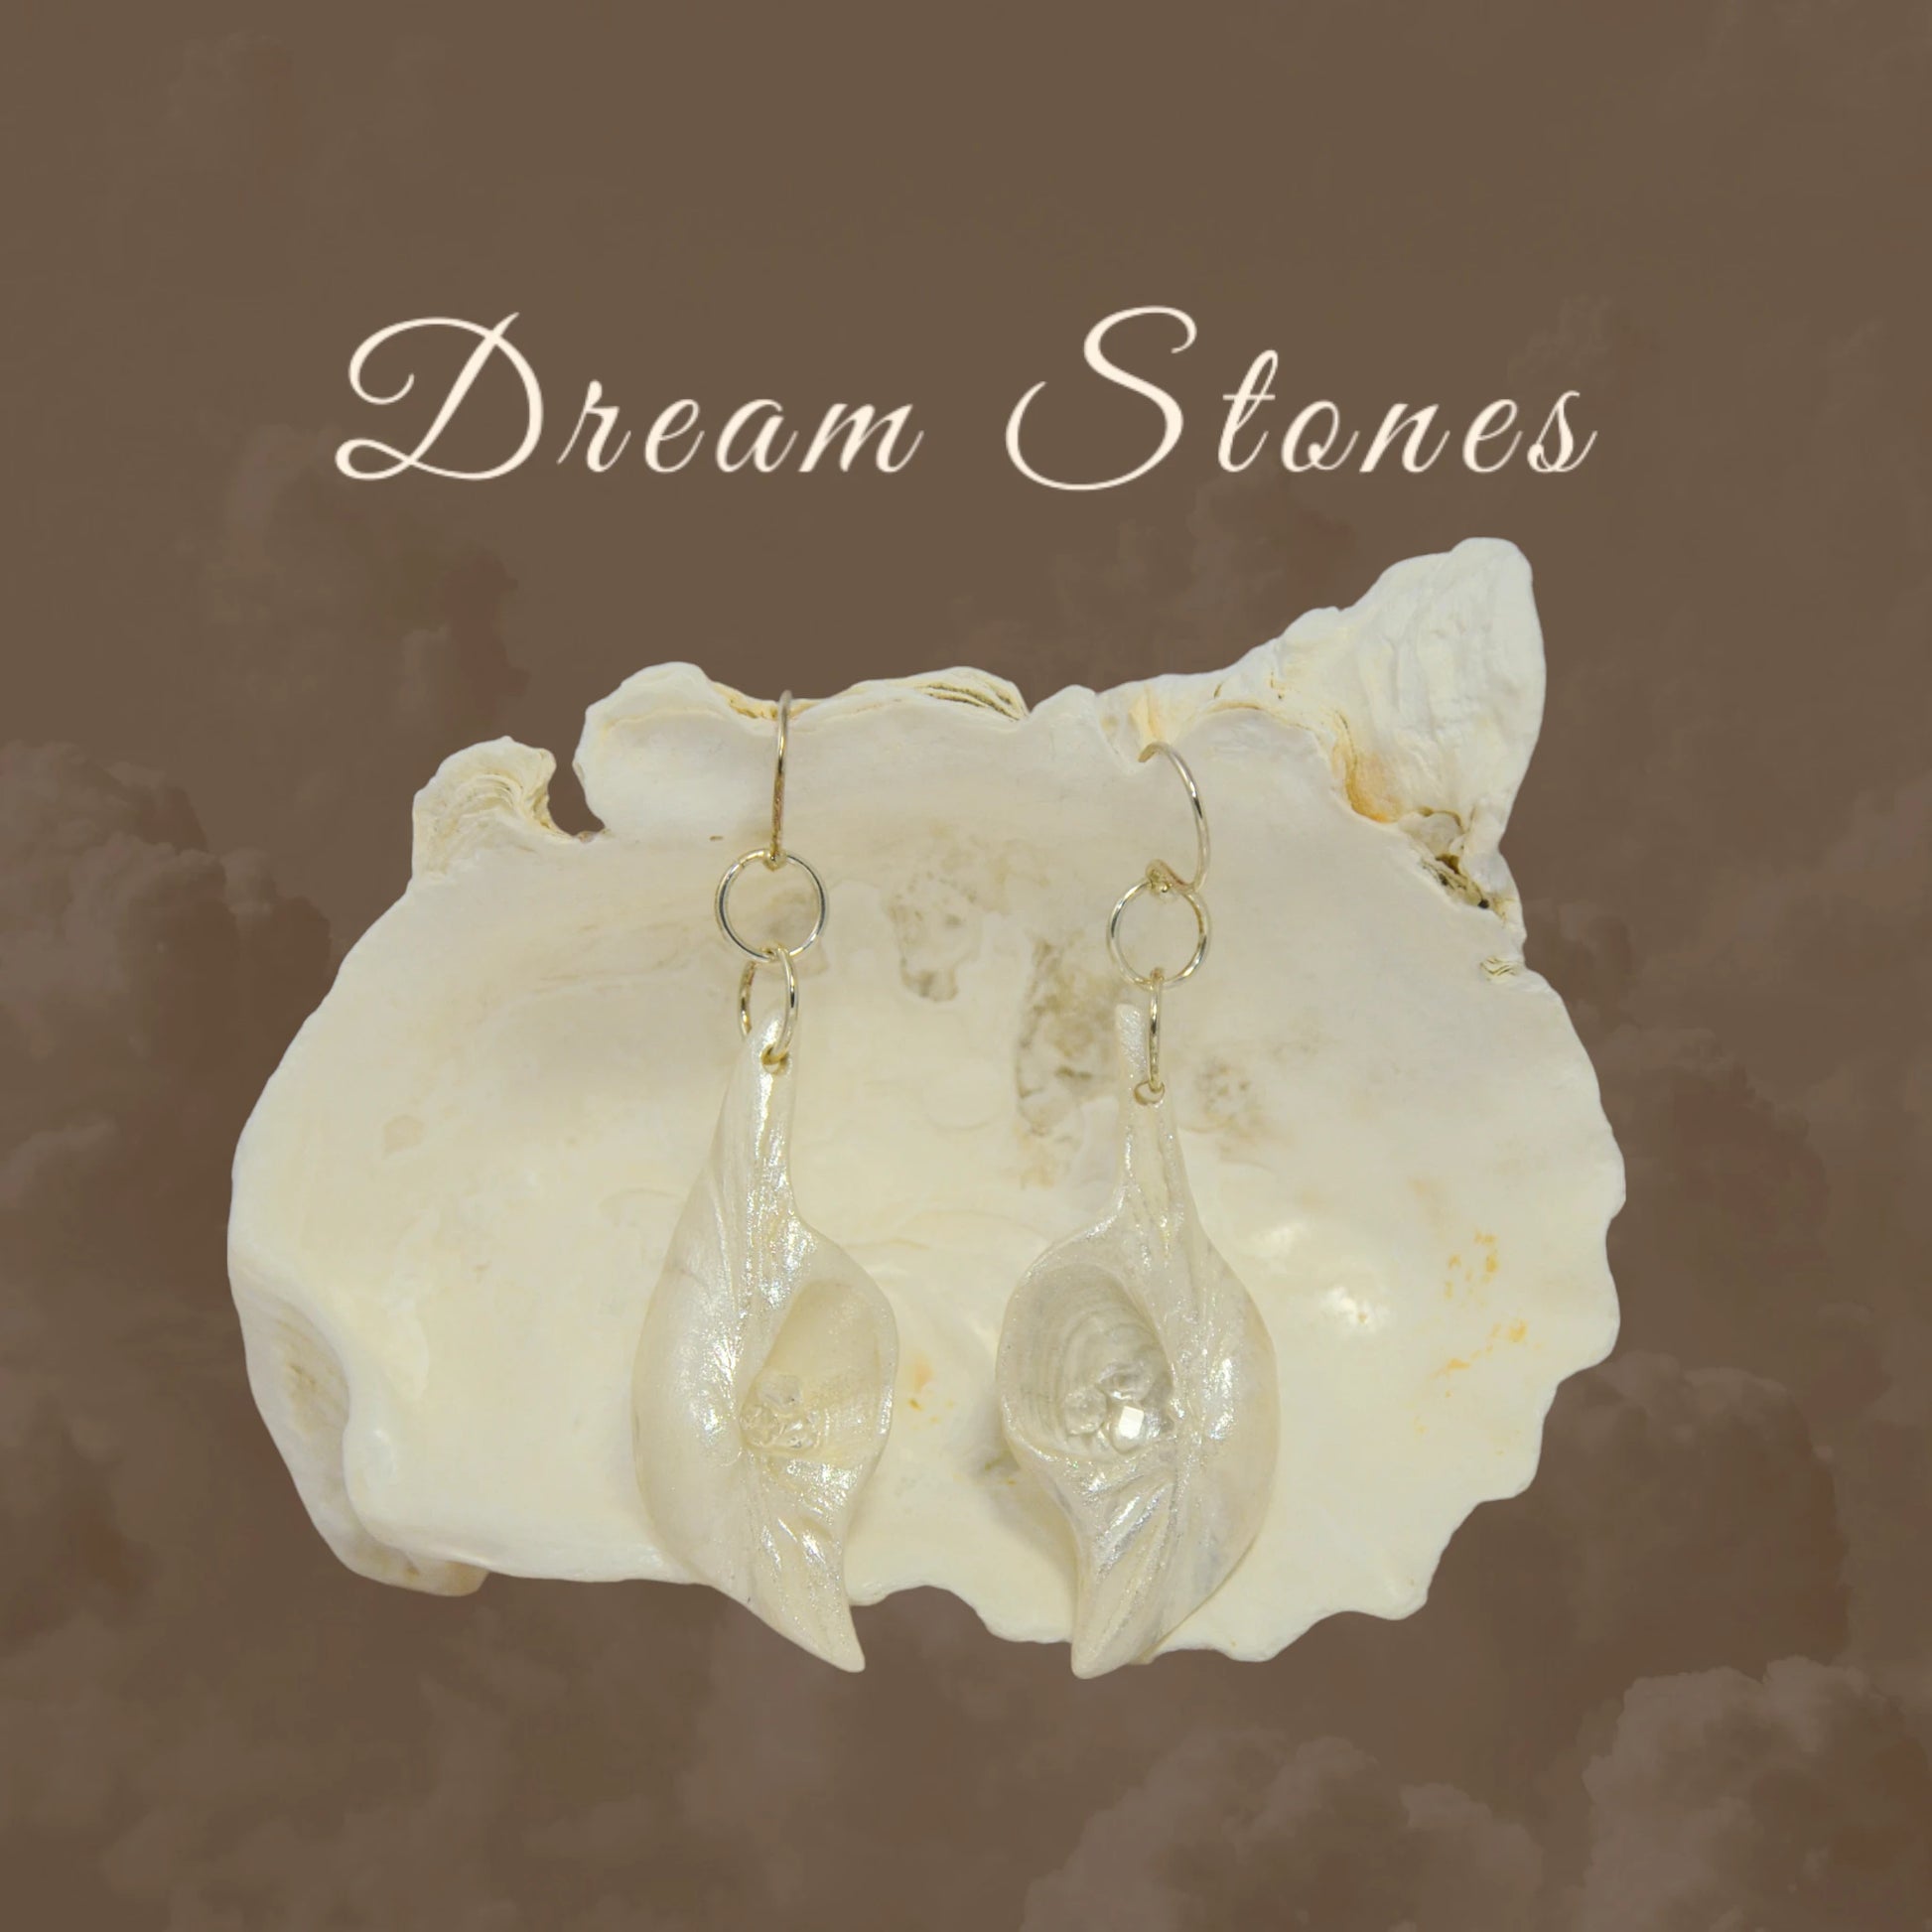 Dream Stone natural seashell earrings with herkimer diamonds. The earrings are shown hanging on a larger seashell.  The words Dream Stones is at the top of the image.